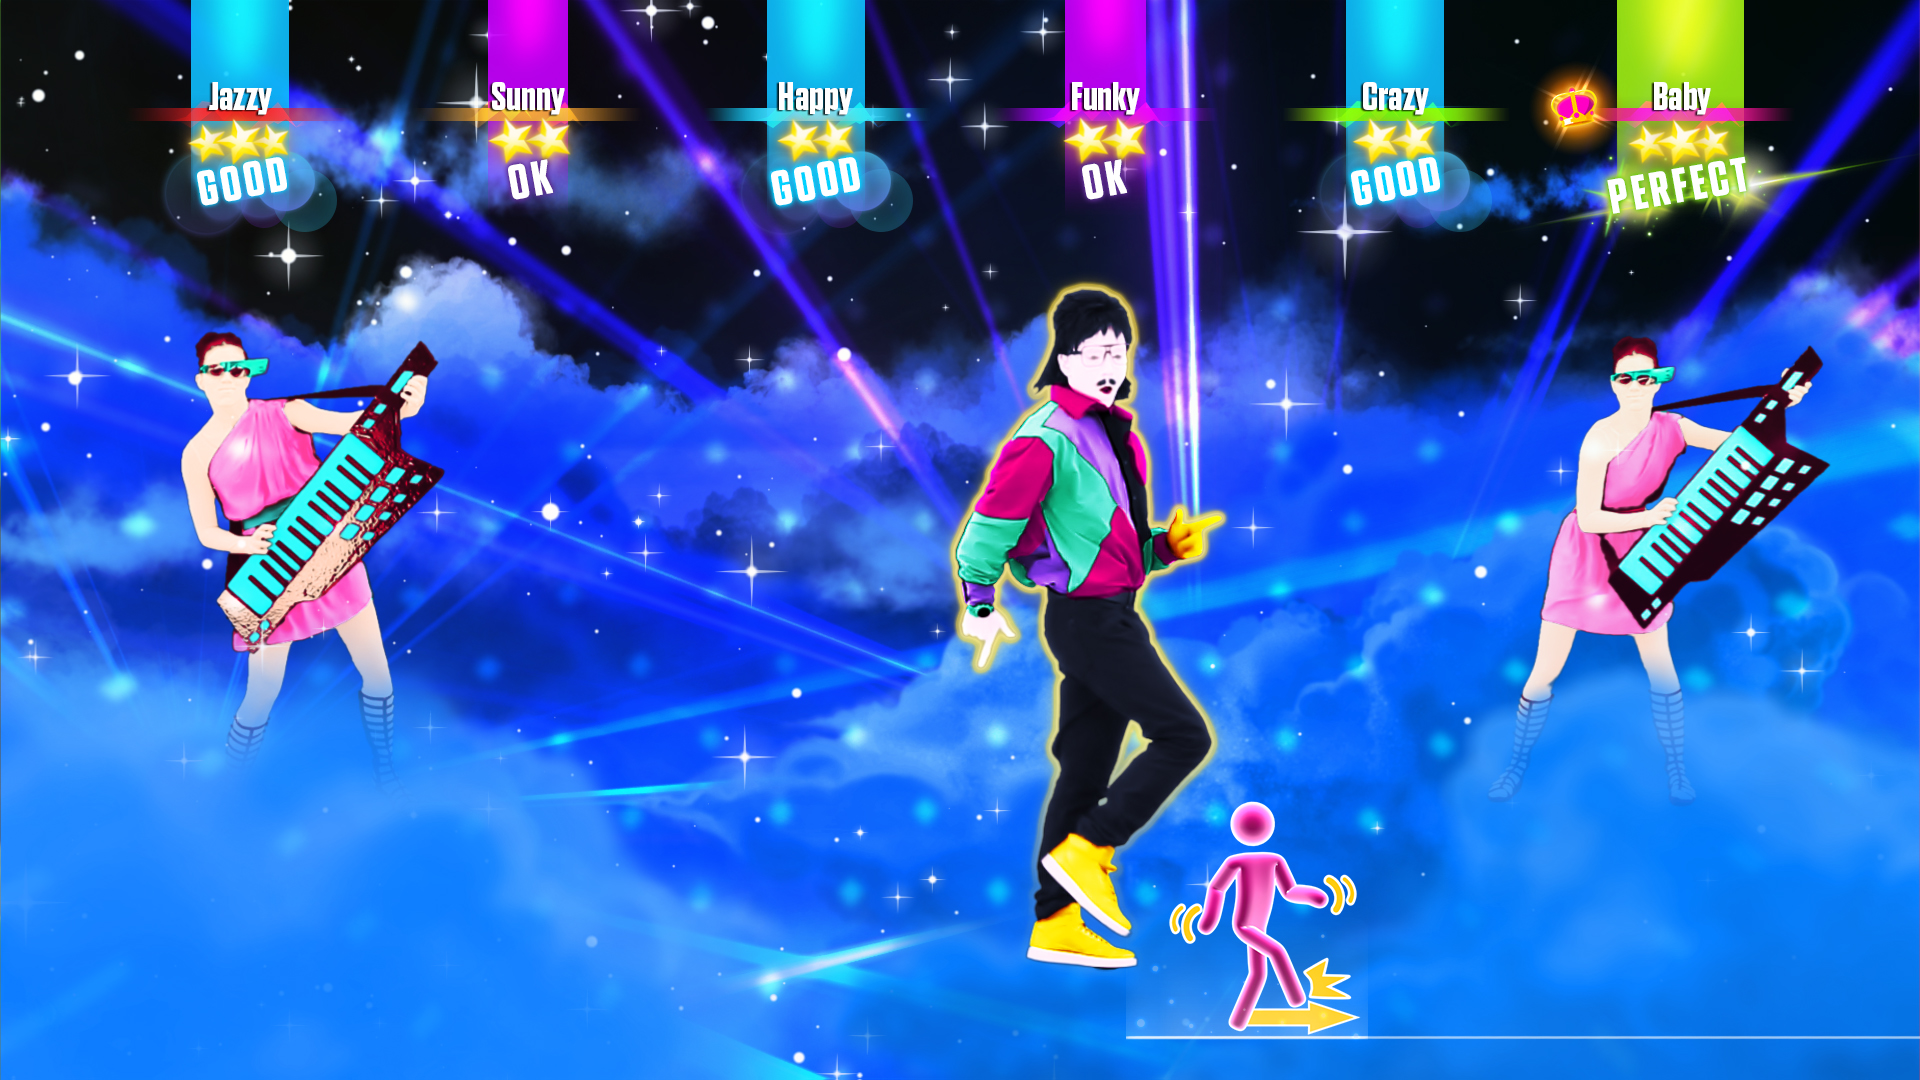 Find the best laptops for Just Dance 2017